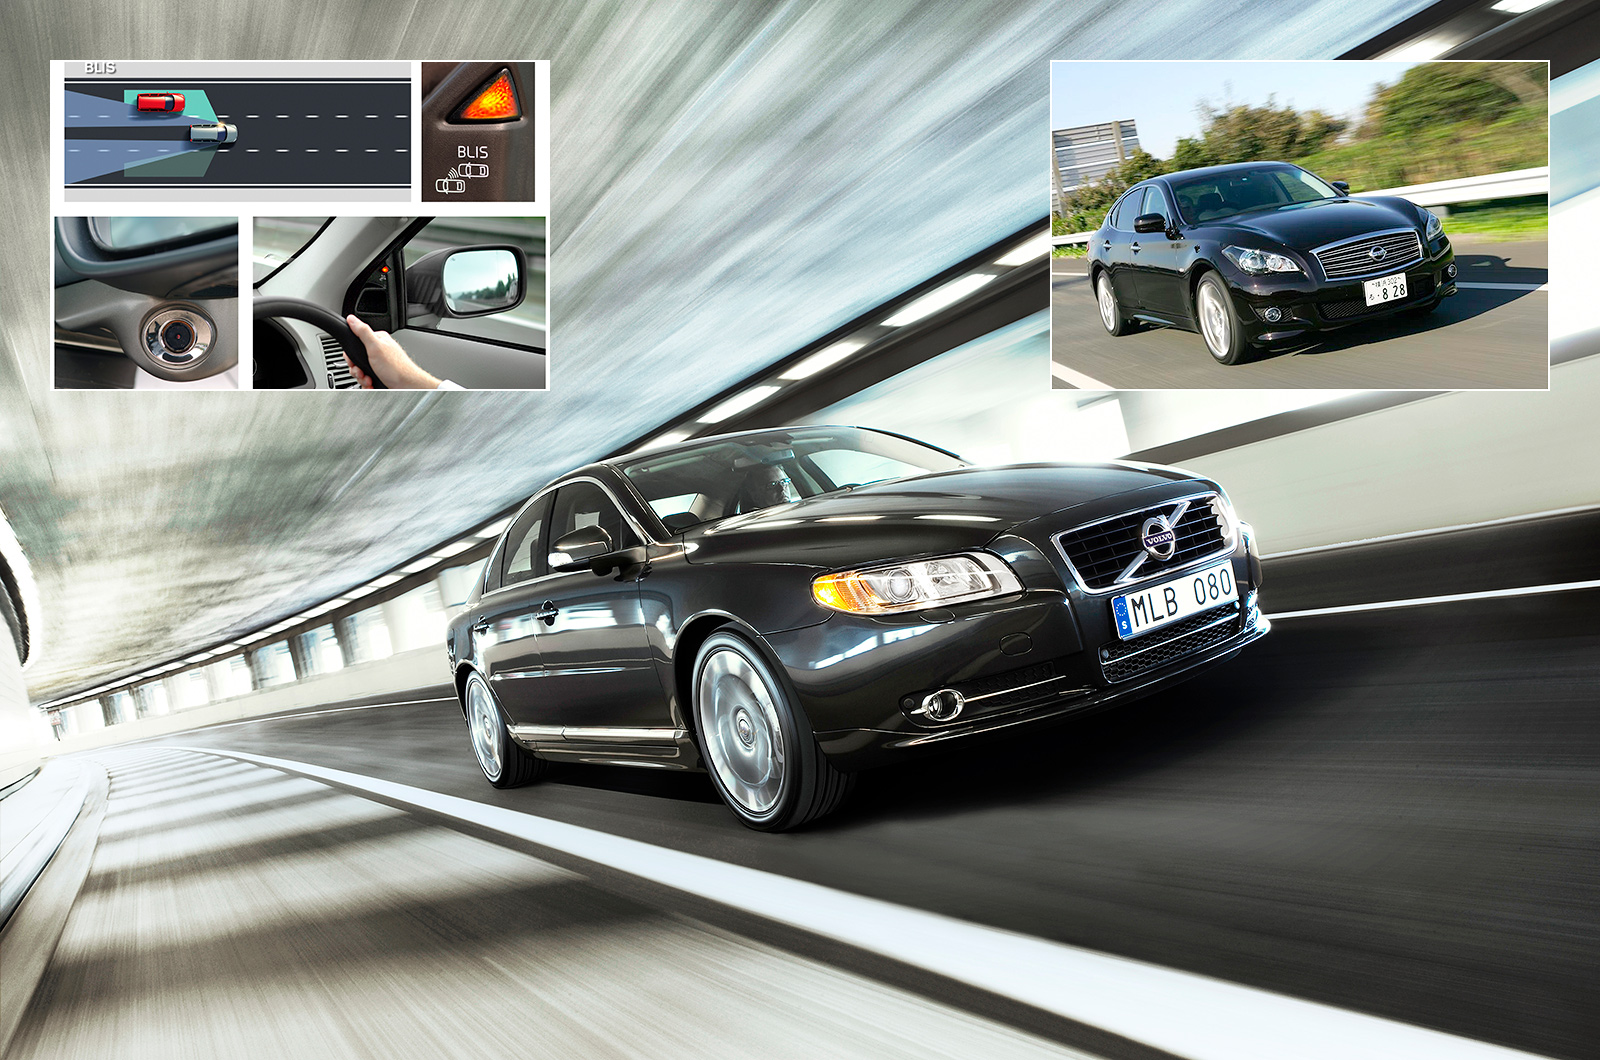 <p>Safety technology got into another gear early in the last decade. <strong>Volvo </strong>was the first company to fit a blind spot monitor, into its <strong>S80</strong>. Using small rear facing cameras mounted below the wing mirrors, it detects vehicles in the car’s blind spots and displays a warning light accordingly (inset, left). The technology has now been widely adopted, usually as part of an enhanced safety options package.</p><p>In 2010, Nissan took the concept further in its Fuga (inset, right) and Infiniti M models – if those cars detect the driver is attempting to move into a vehicle’s path, the steering wheel will actively resist the manoeuvre.</p><p><strong>GROUNDBREAKER SCORE: 5 </strong>– a potential life-saver.</p>